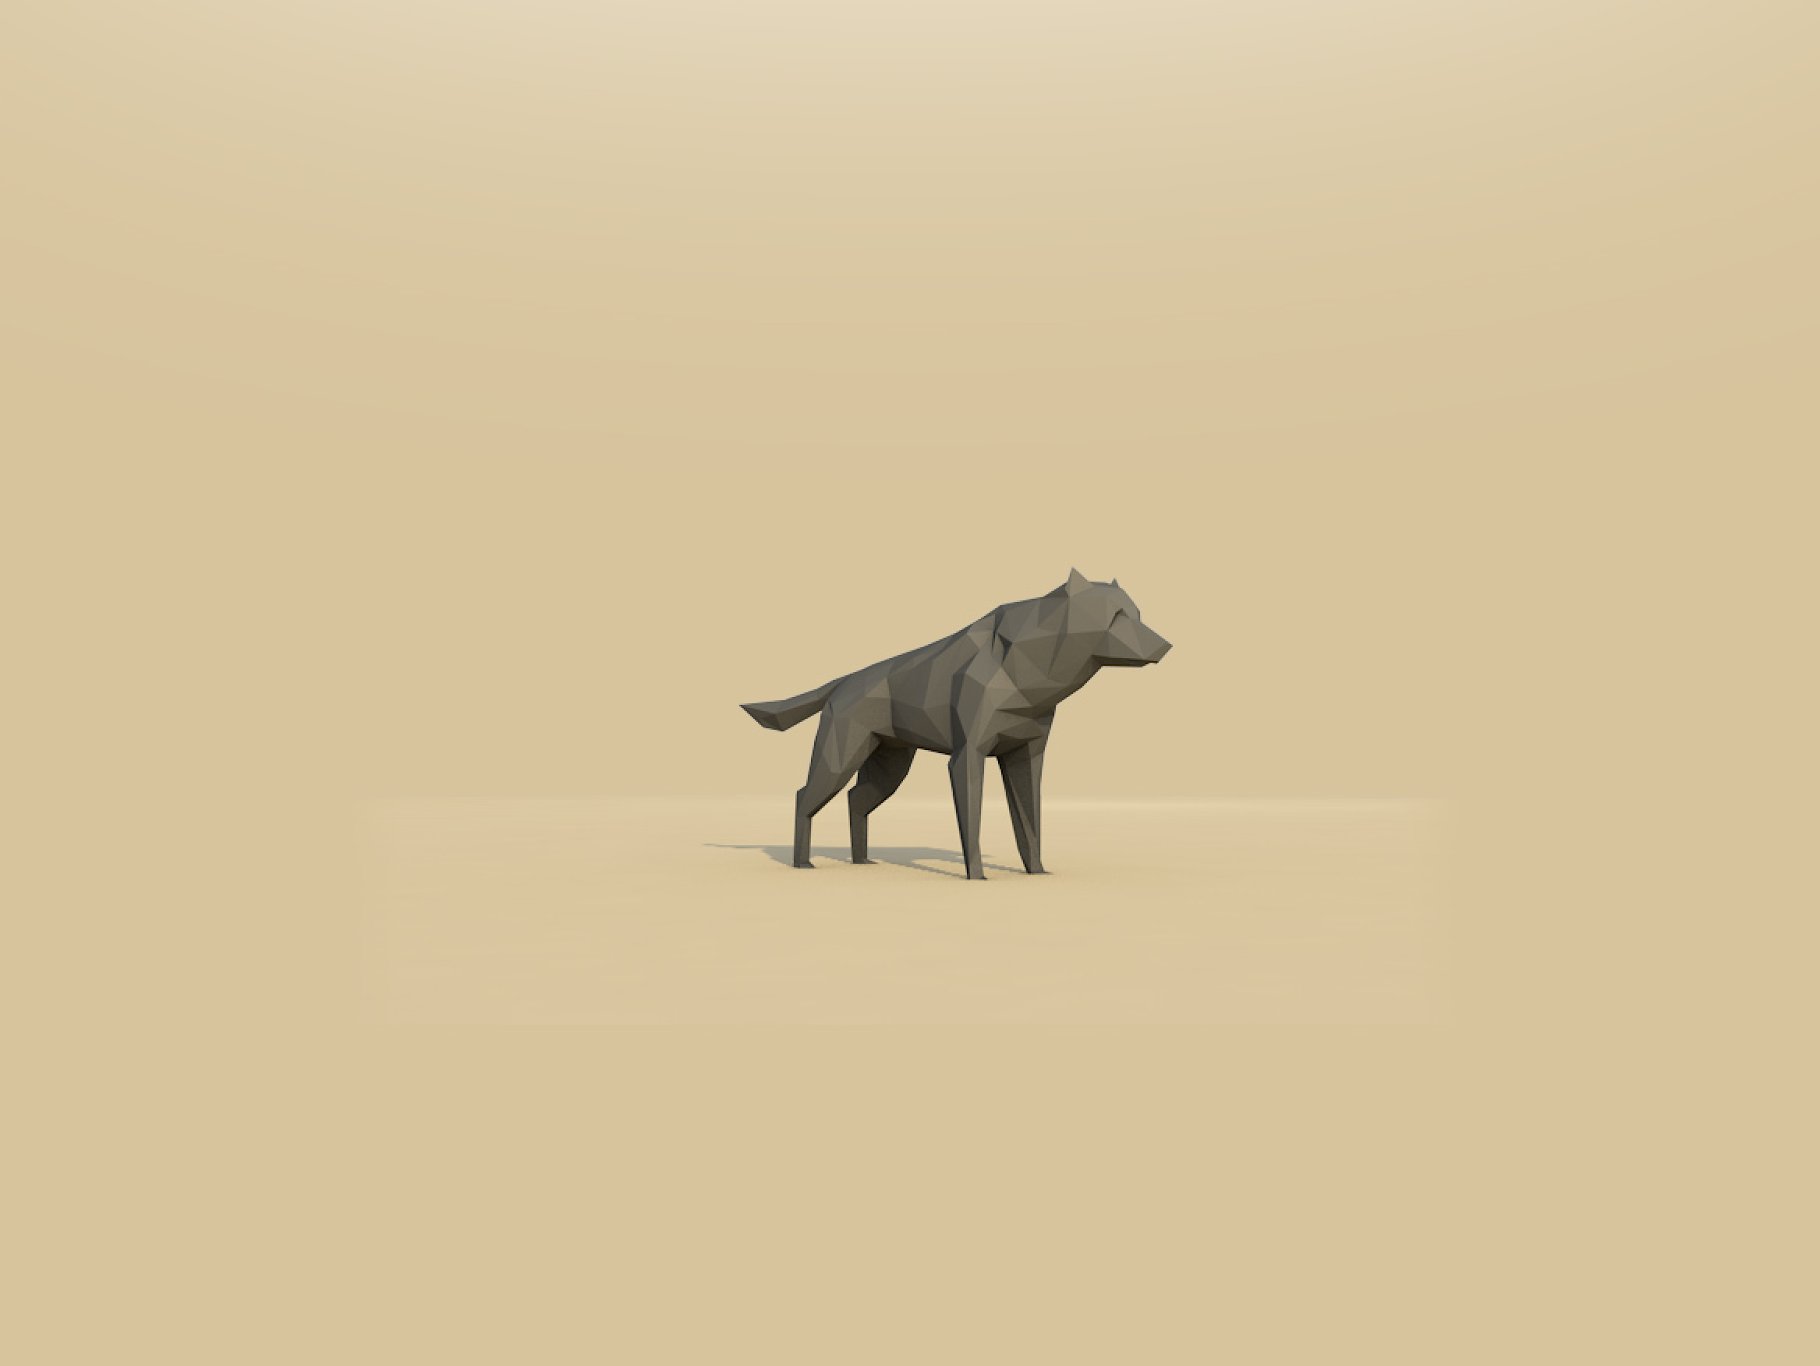 Lowpoly mockup of a wolf on a beige background.